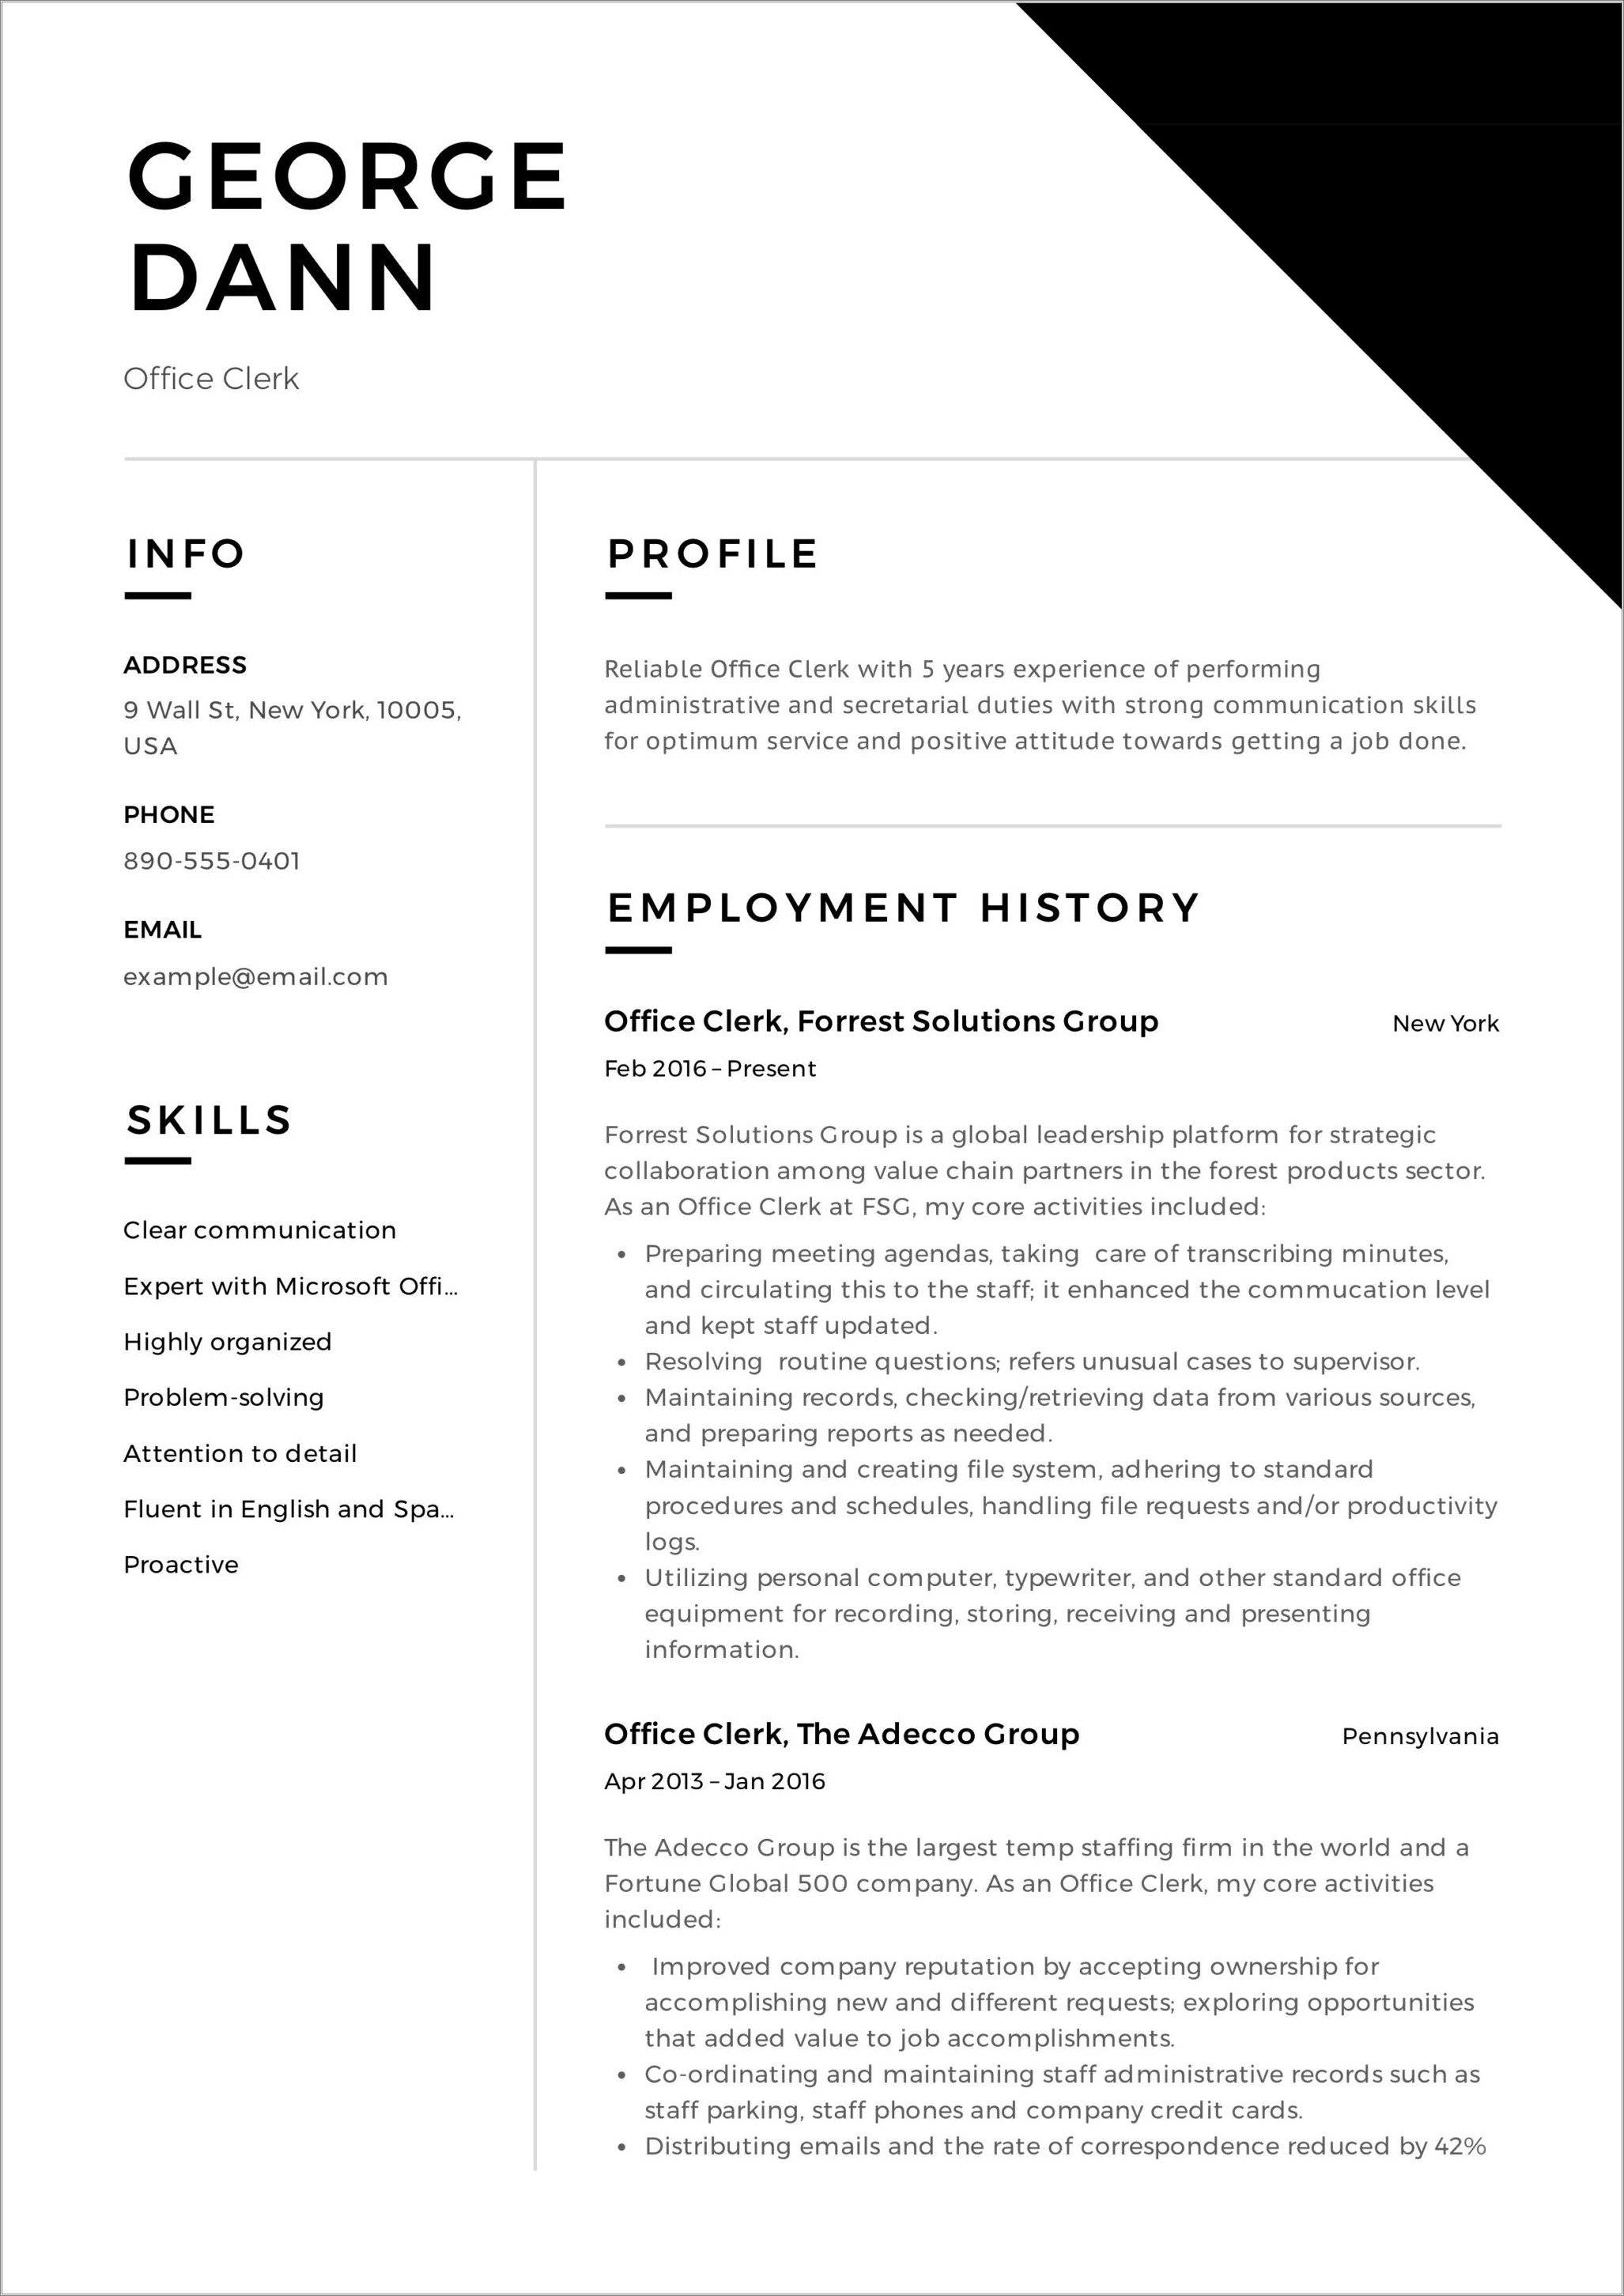 Write A Resume Objective For Clerical Work